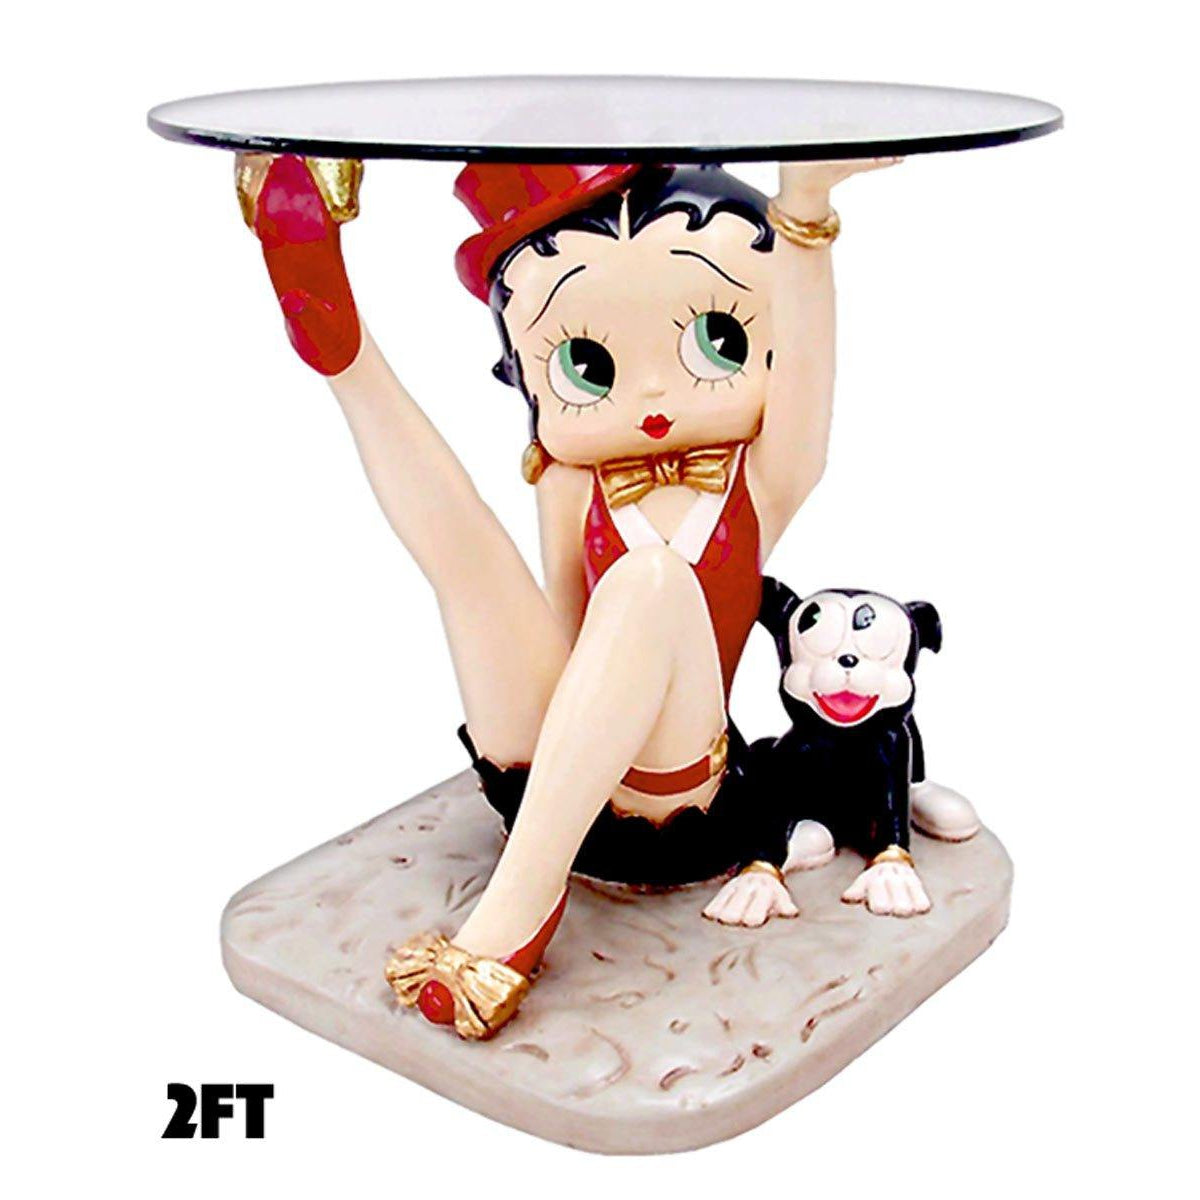 Betty Boop Table (Betty Boop) - Gallery Gifts Online 